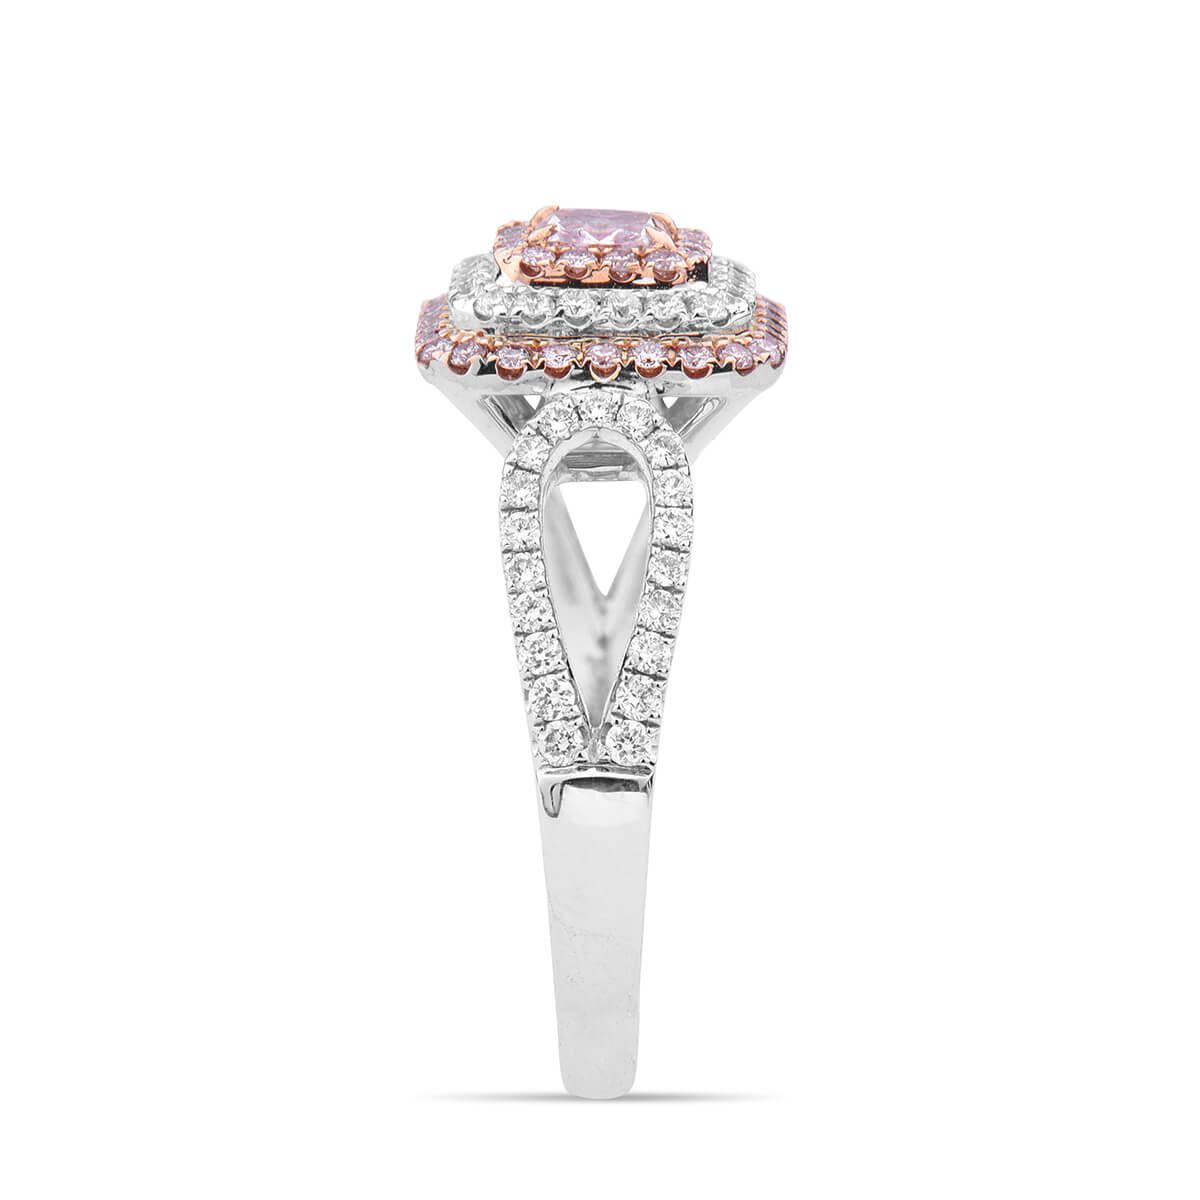 Fancy Brownish Pink Diamond Ring, 0.28 Ct. (0.87 Ct. TW), Radiant shape, GIA Certified, 2185351636